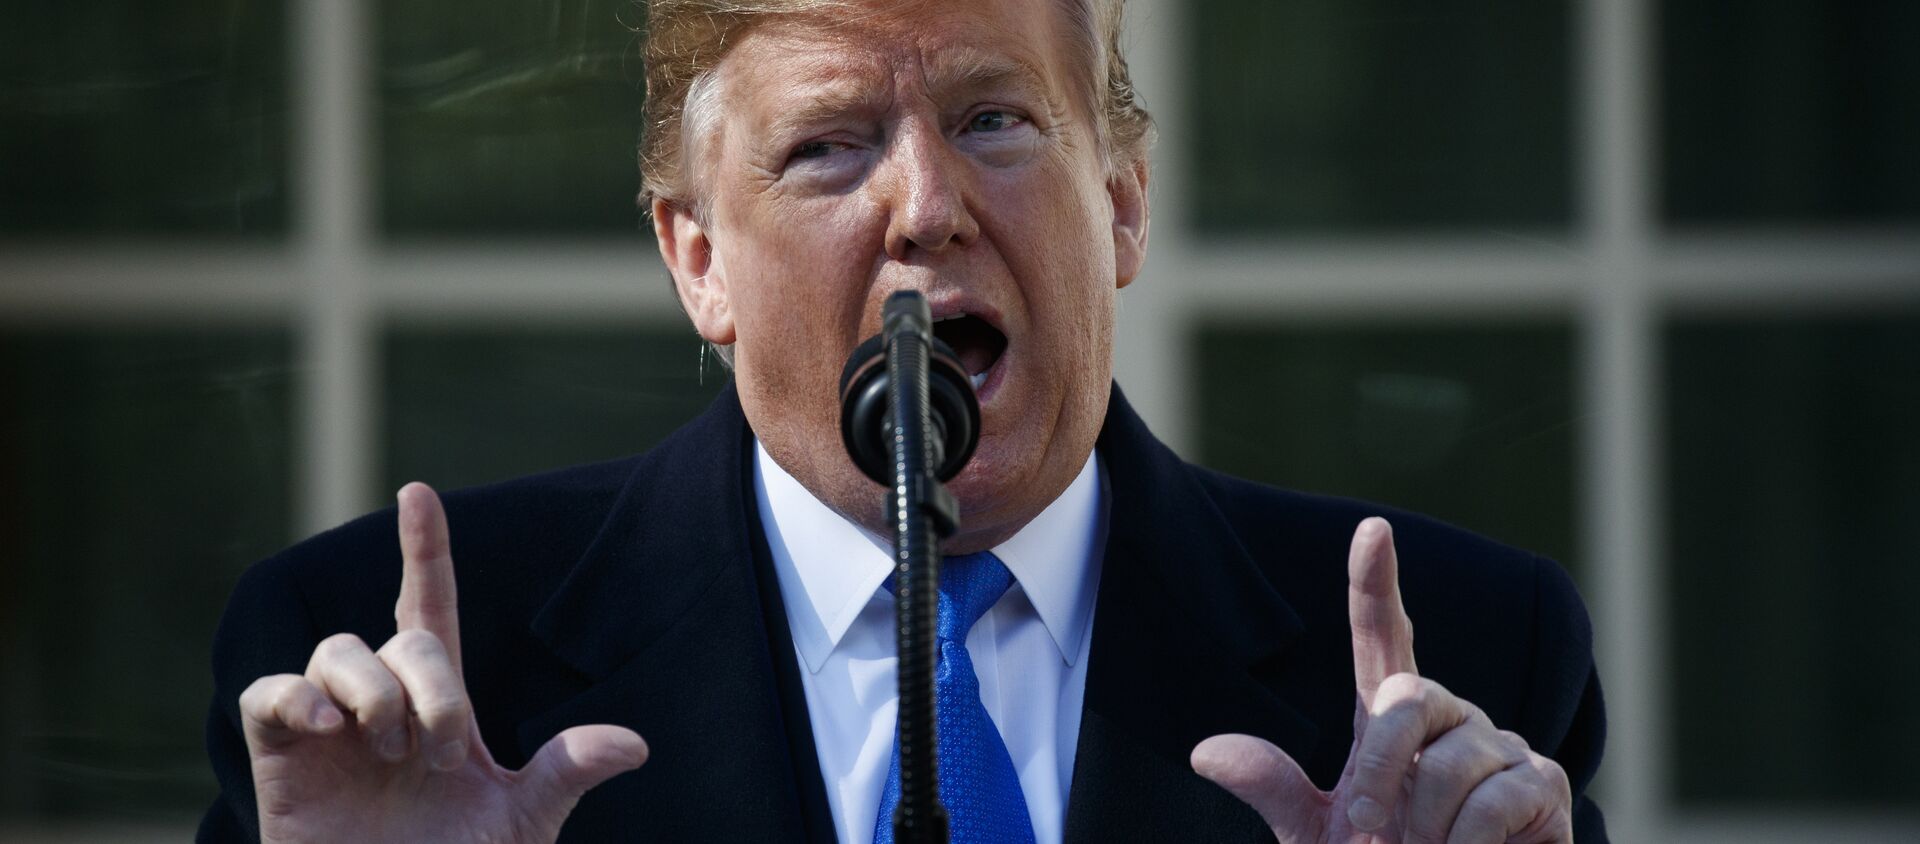 President Donald Trump speaks during an event in the Rose Garden at the White House to declare a national emergency in order to build a wall along the southern border, Friday, Feb. 15, 2019, in Washington - Sputnik International, 1920, 17.03.2019